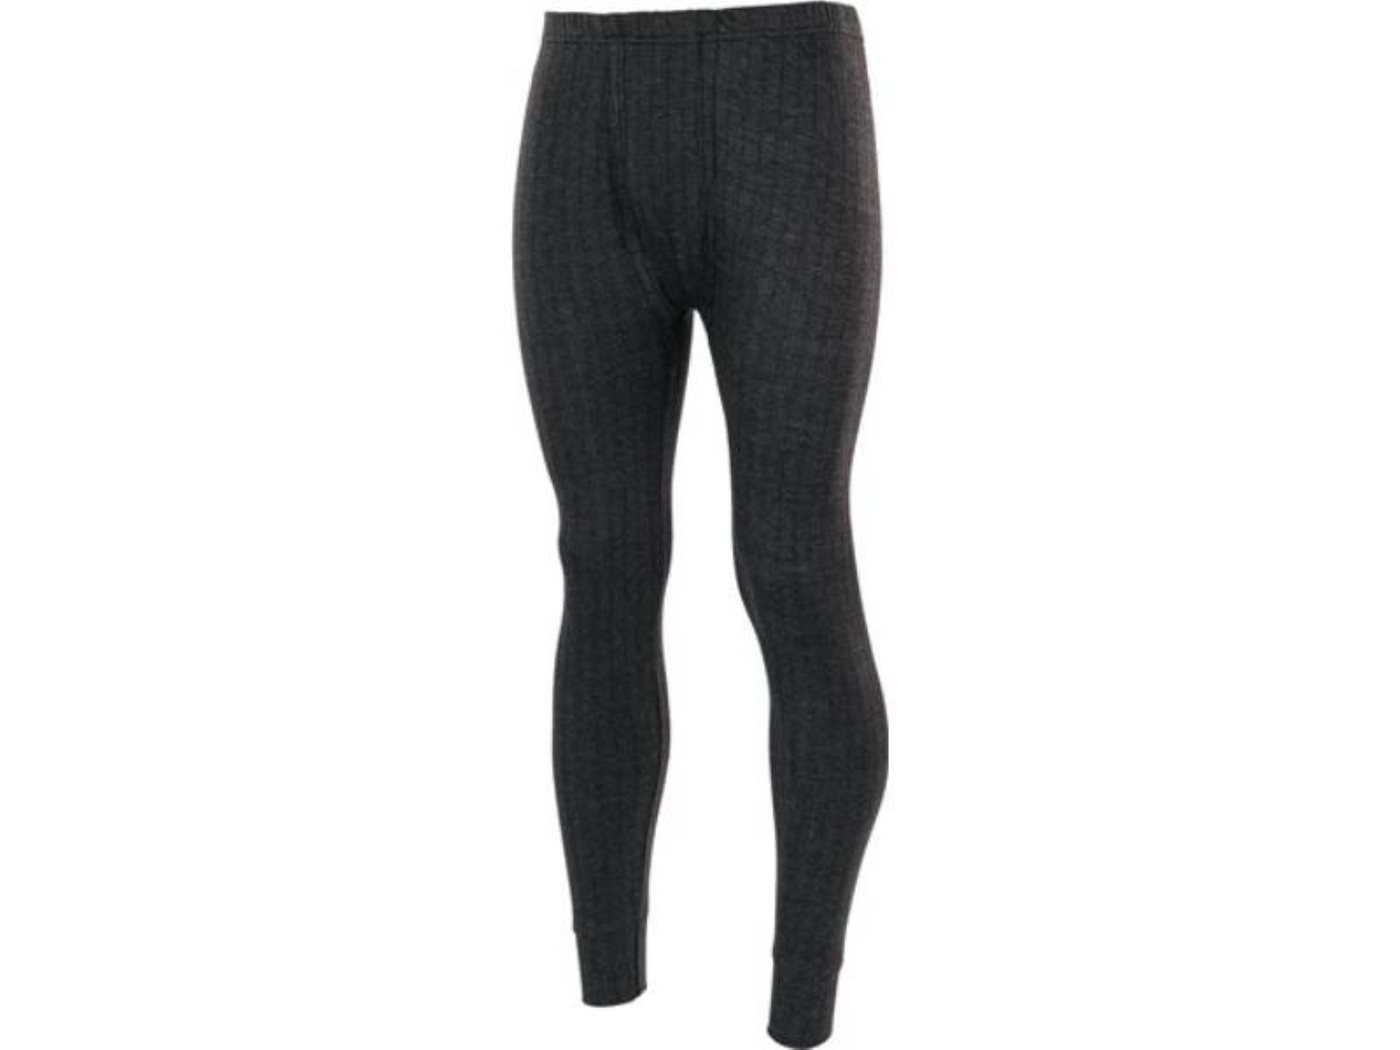 ISM Schutzhose Thermo-Funktionshose THERMOGETIC TRS Gr.XXL anth.ISM Material: 75% Bau von ISM